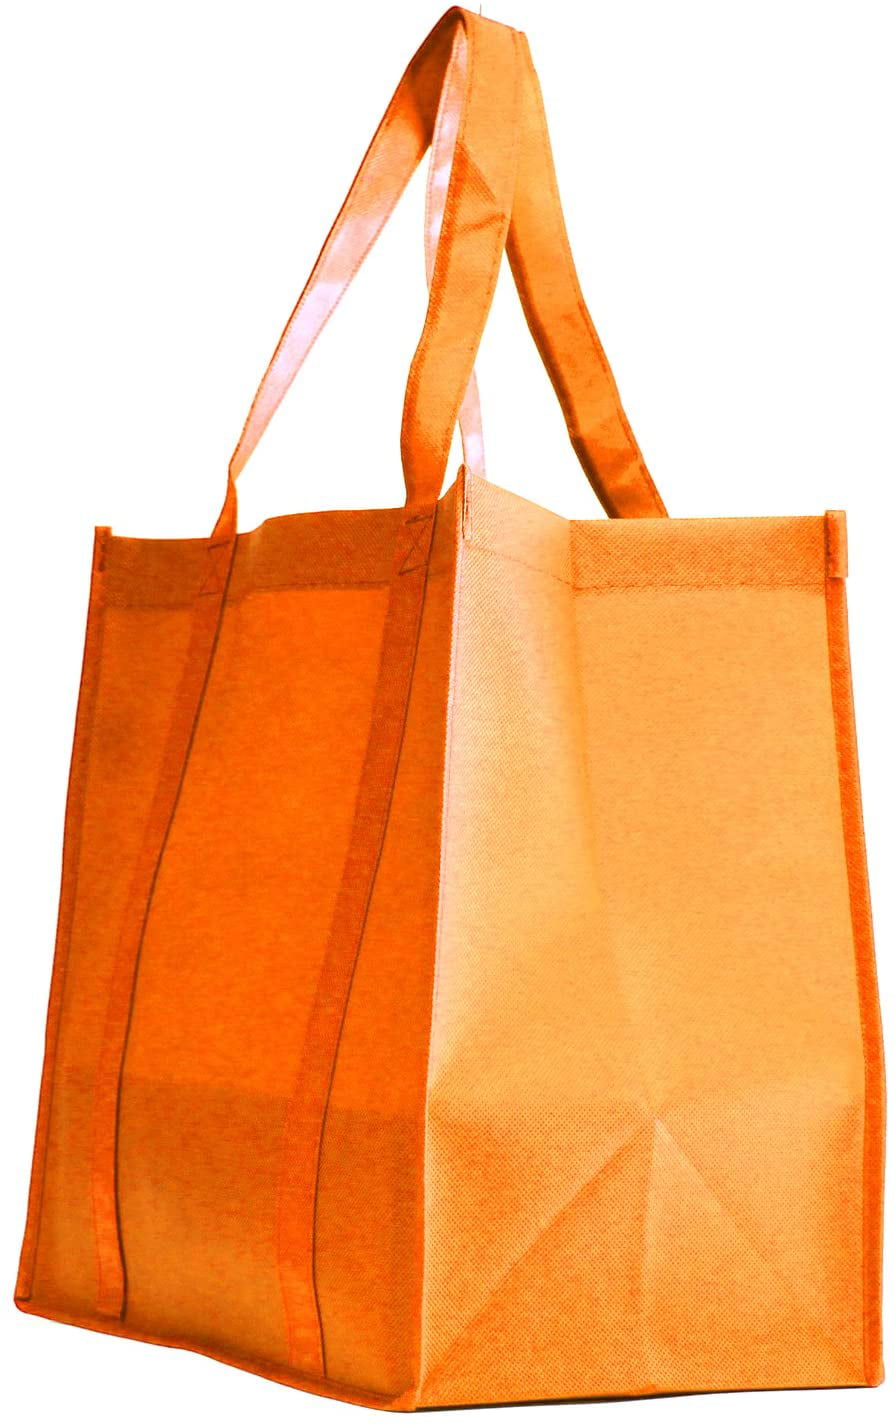 10 Extra-Wide Bottom Grocery Shopping Tote Bag